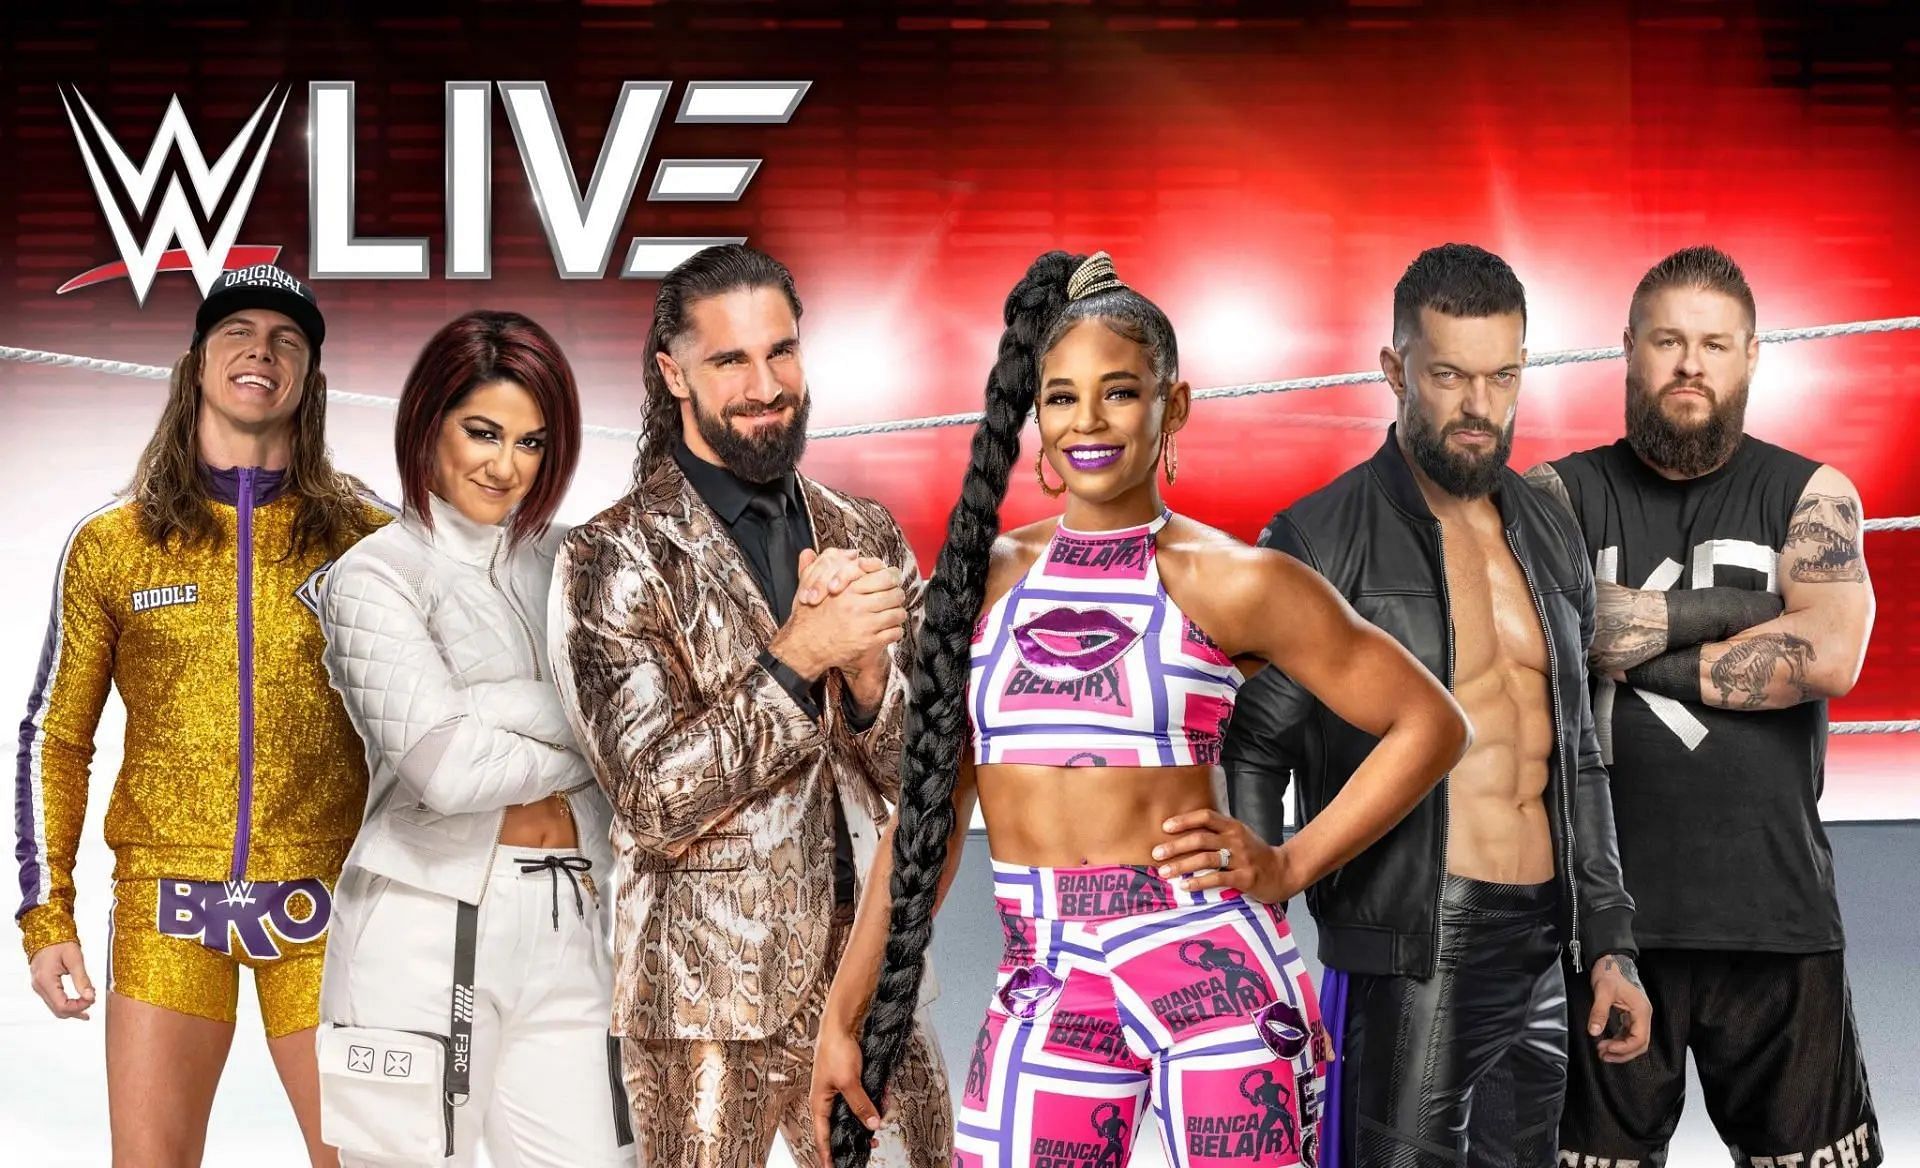 WWE are returning to Europe for a tour in 2023